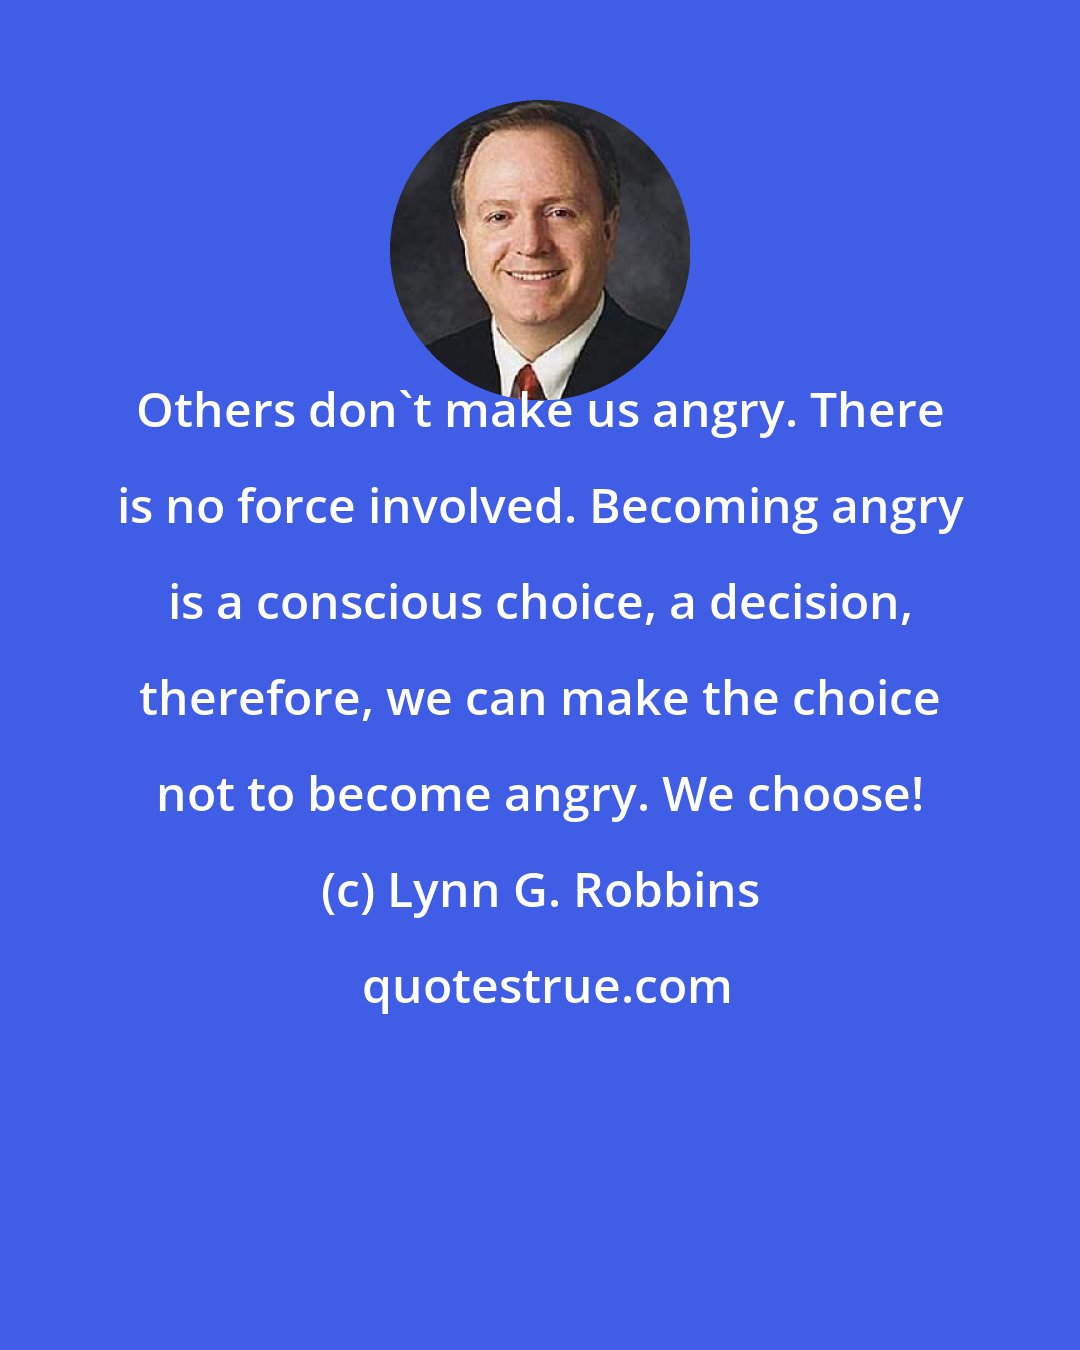 Lynn G. Robbins: Others don't make us angry. There is no force involved. Becoming angry is a conscious choice, a decision, therefore, we can make the choice not to become angry. We choose!